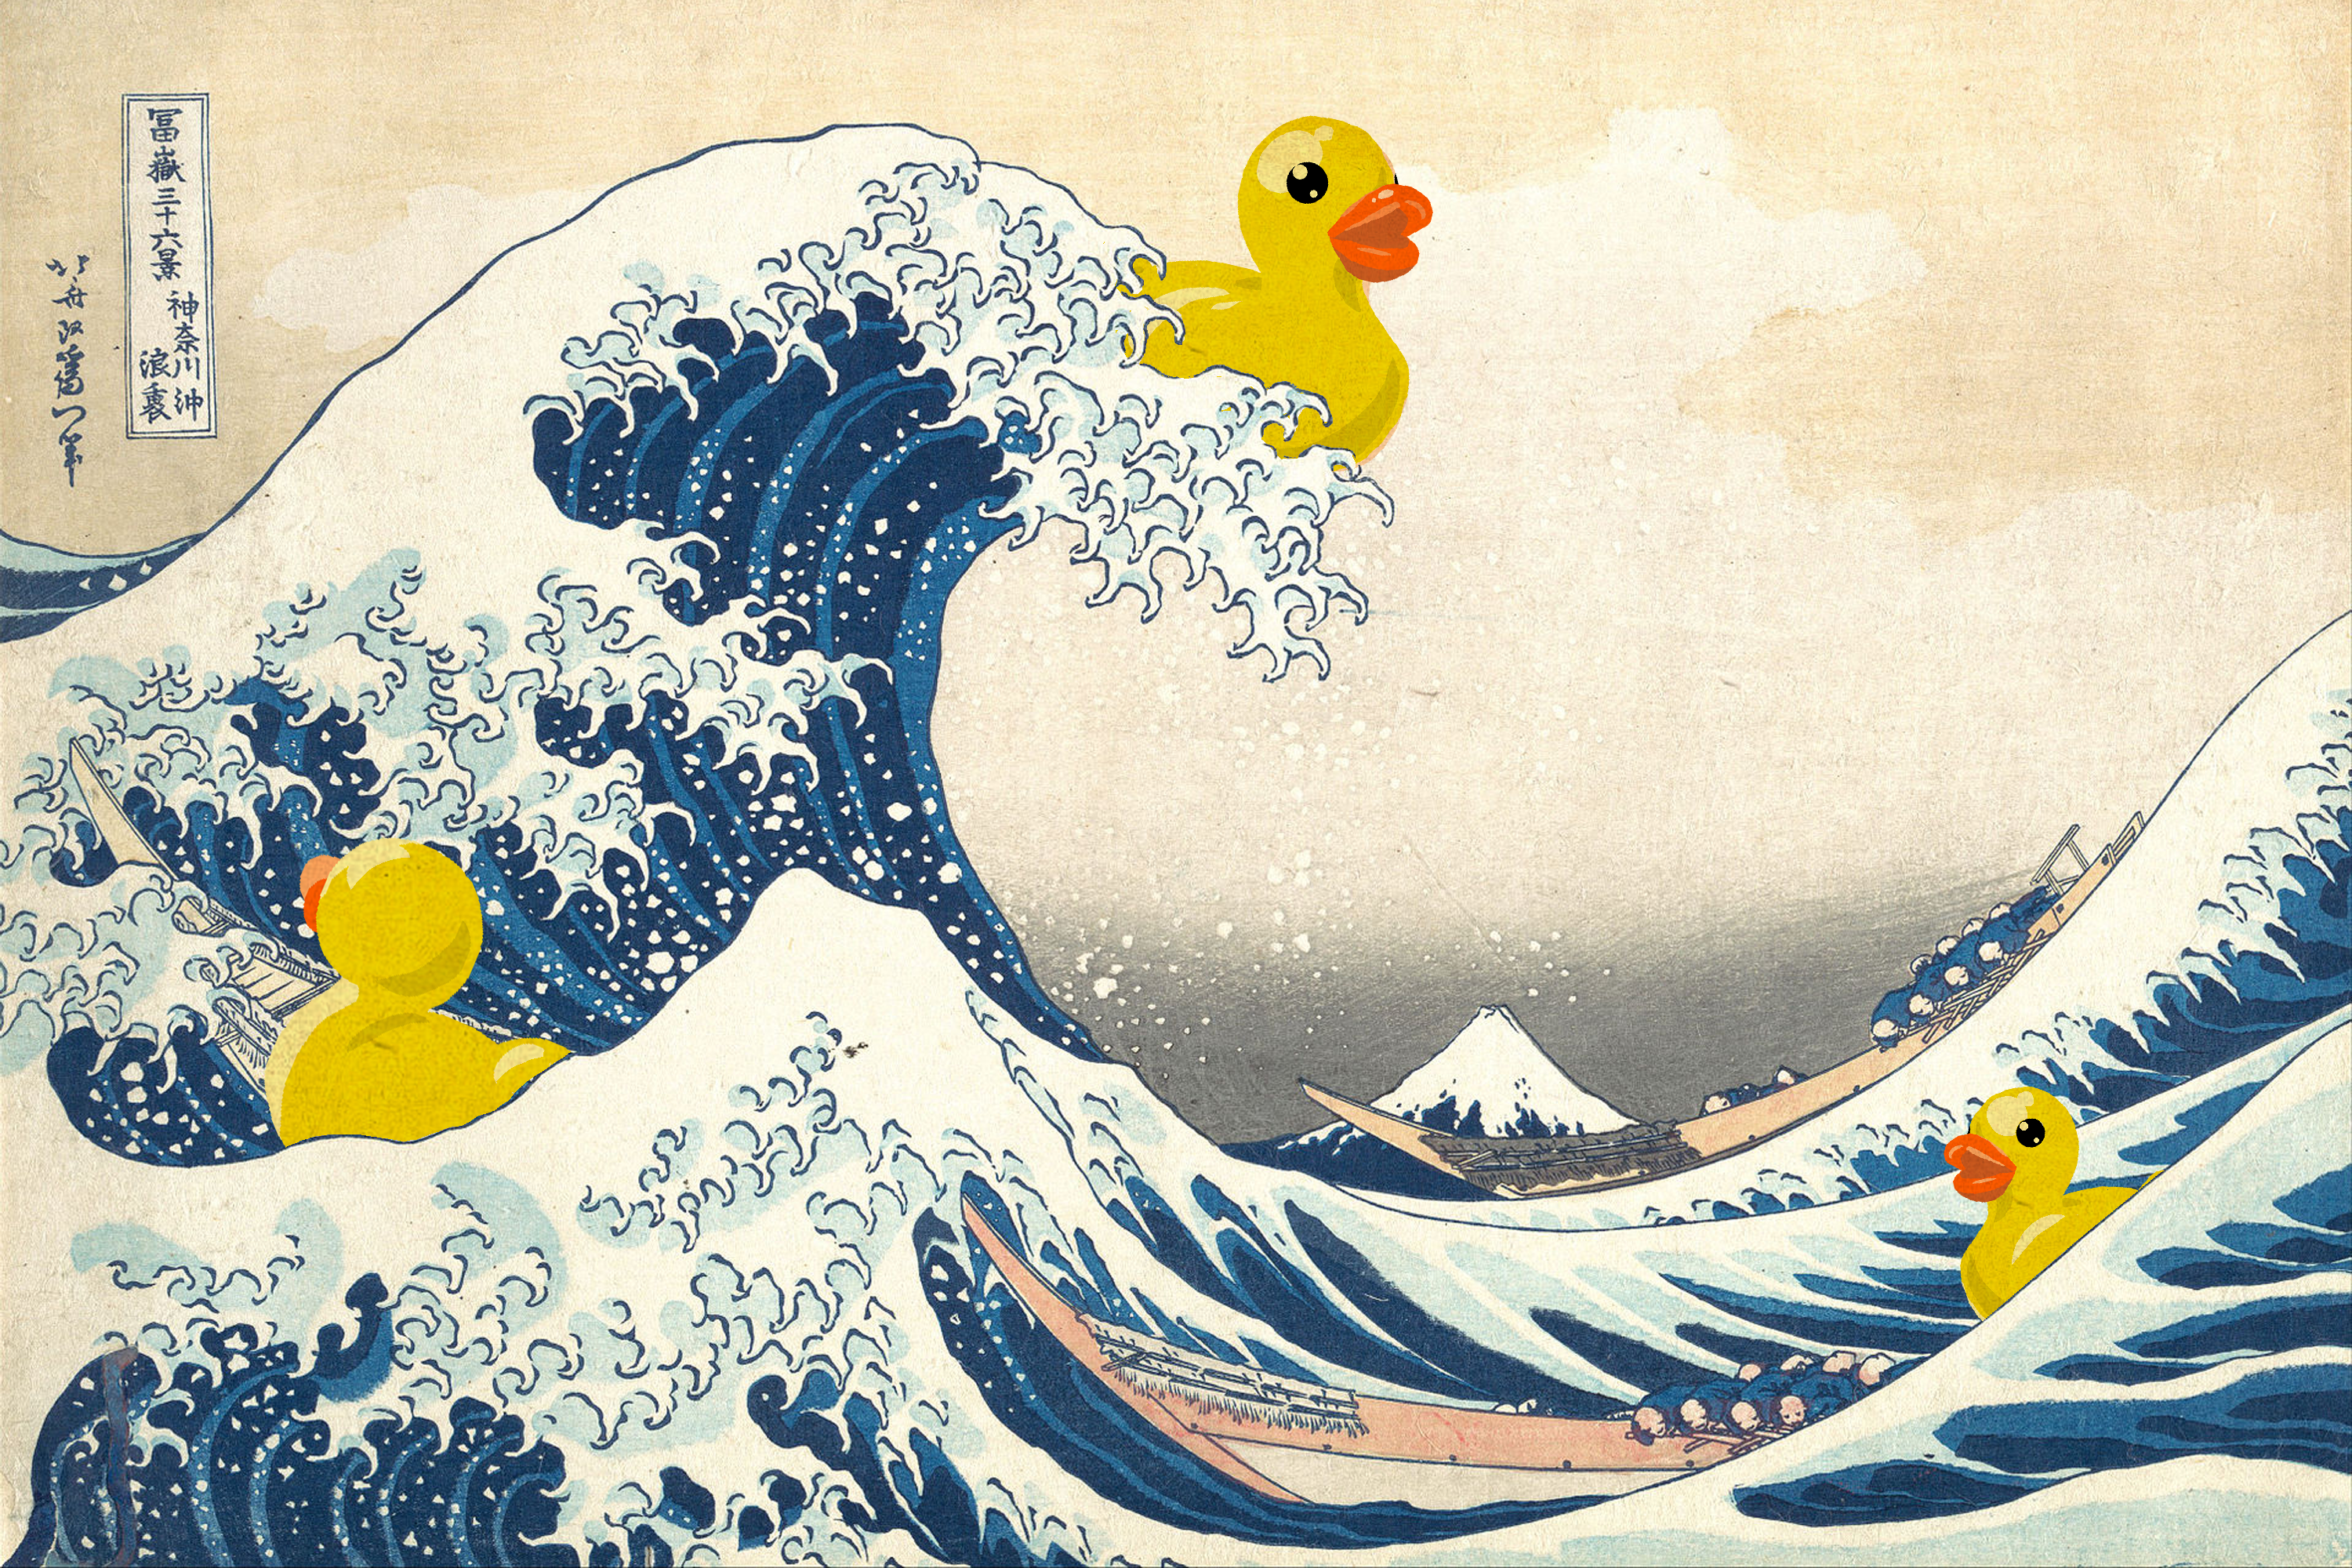 A rubber duckie riding a wave.